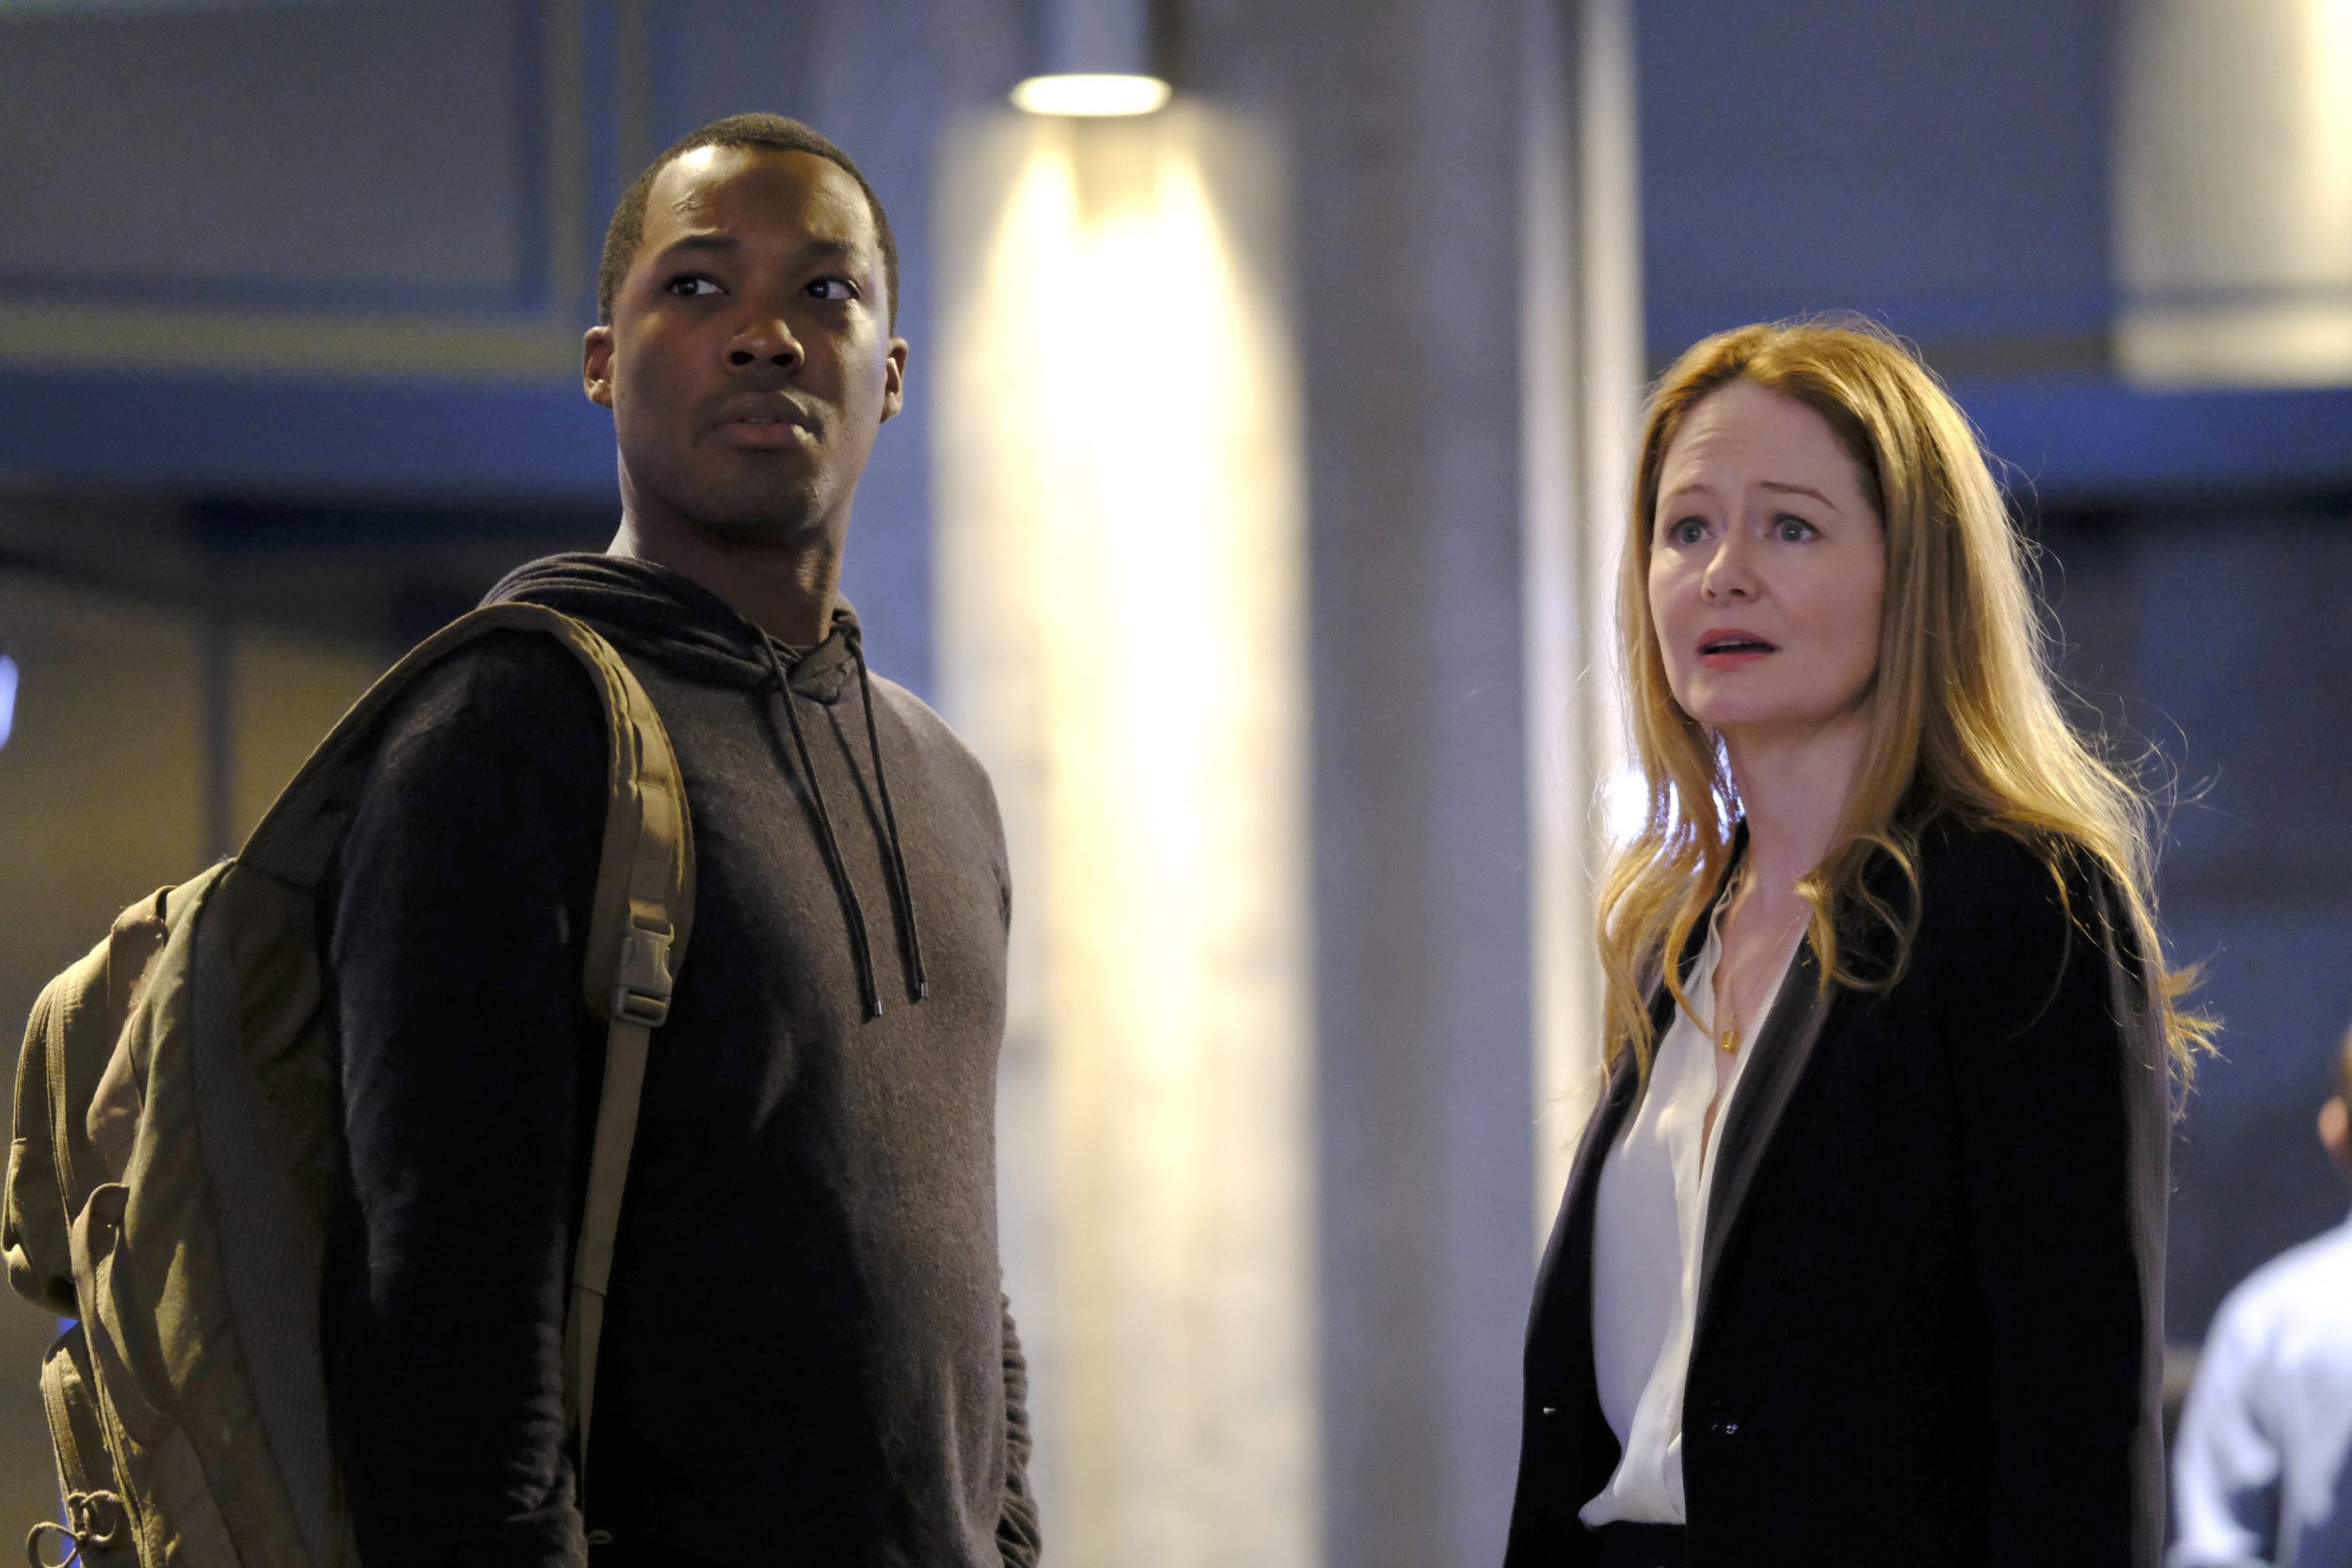 24: LEGACY: L-R: Corey Hawkins and Miranda Otto in the “3:00 PM-4:00 PM” episode of 24: LEGACY airing Monday, Feb. 20 (8:00-9:01 PM ET/PT) on FOX. ©2017 Fox Broadcasting Co. Cr: Guy D'Alema/FOX